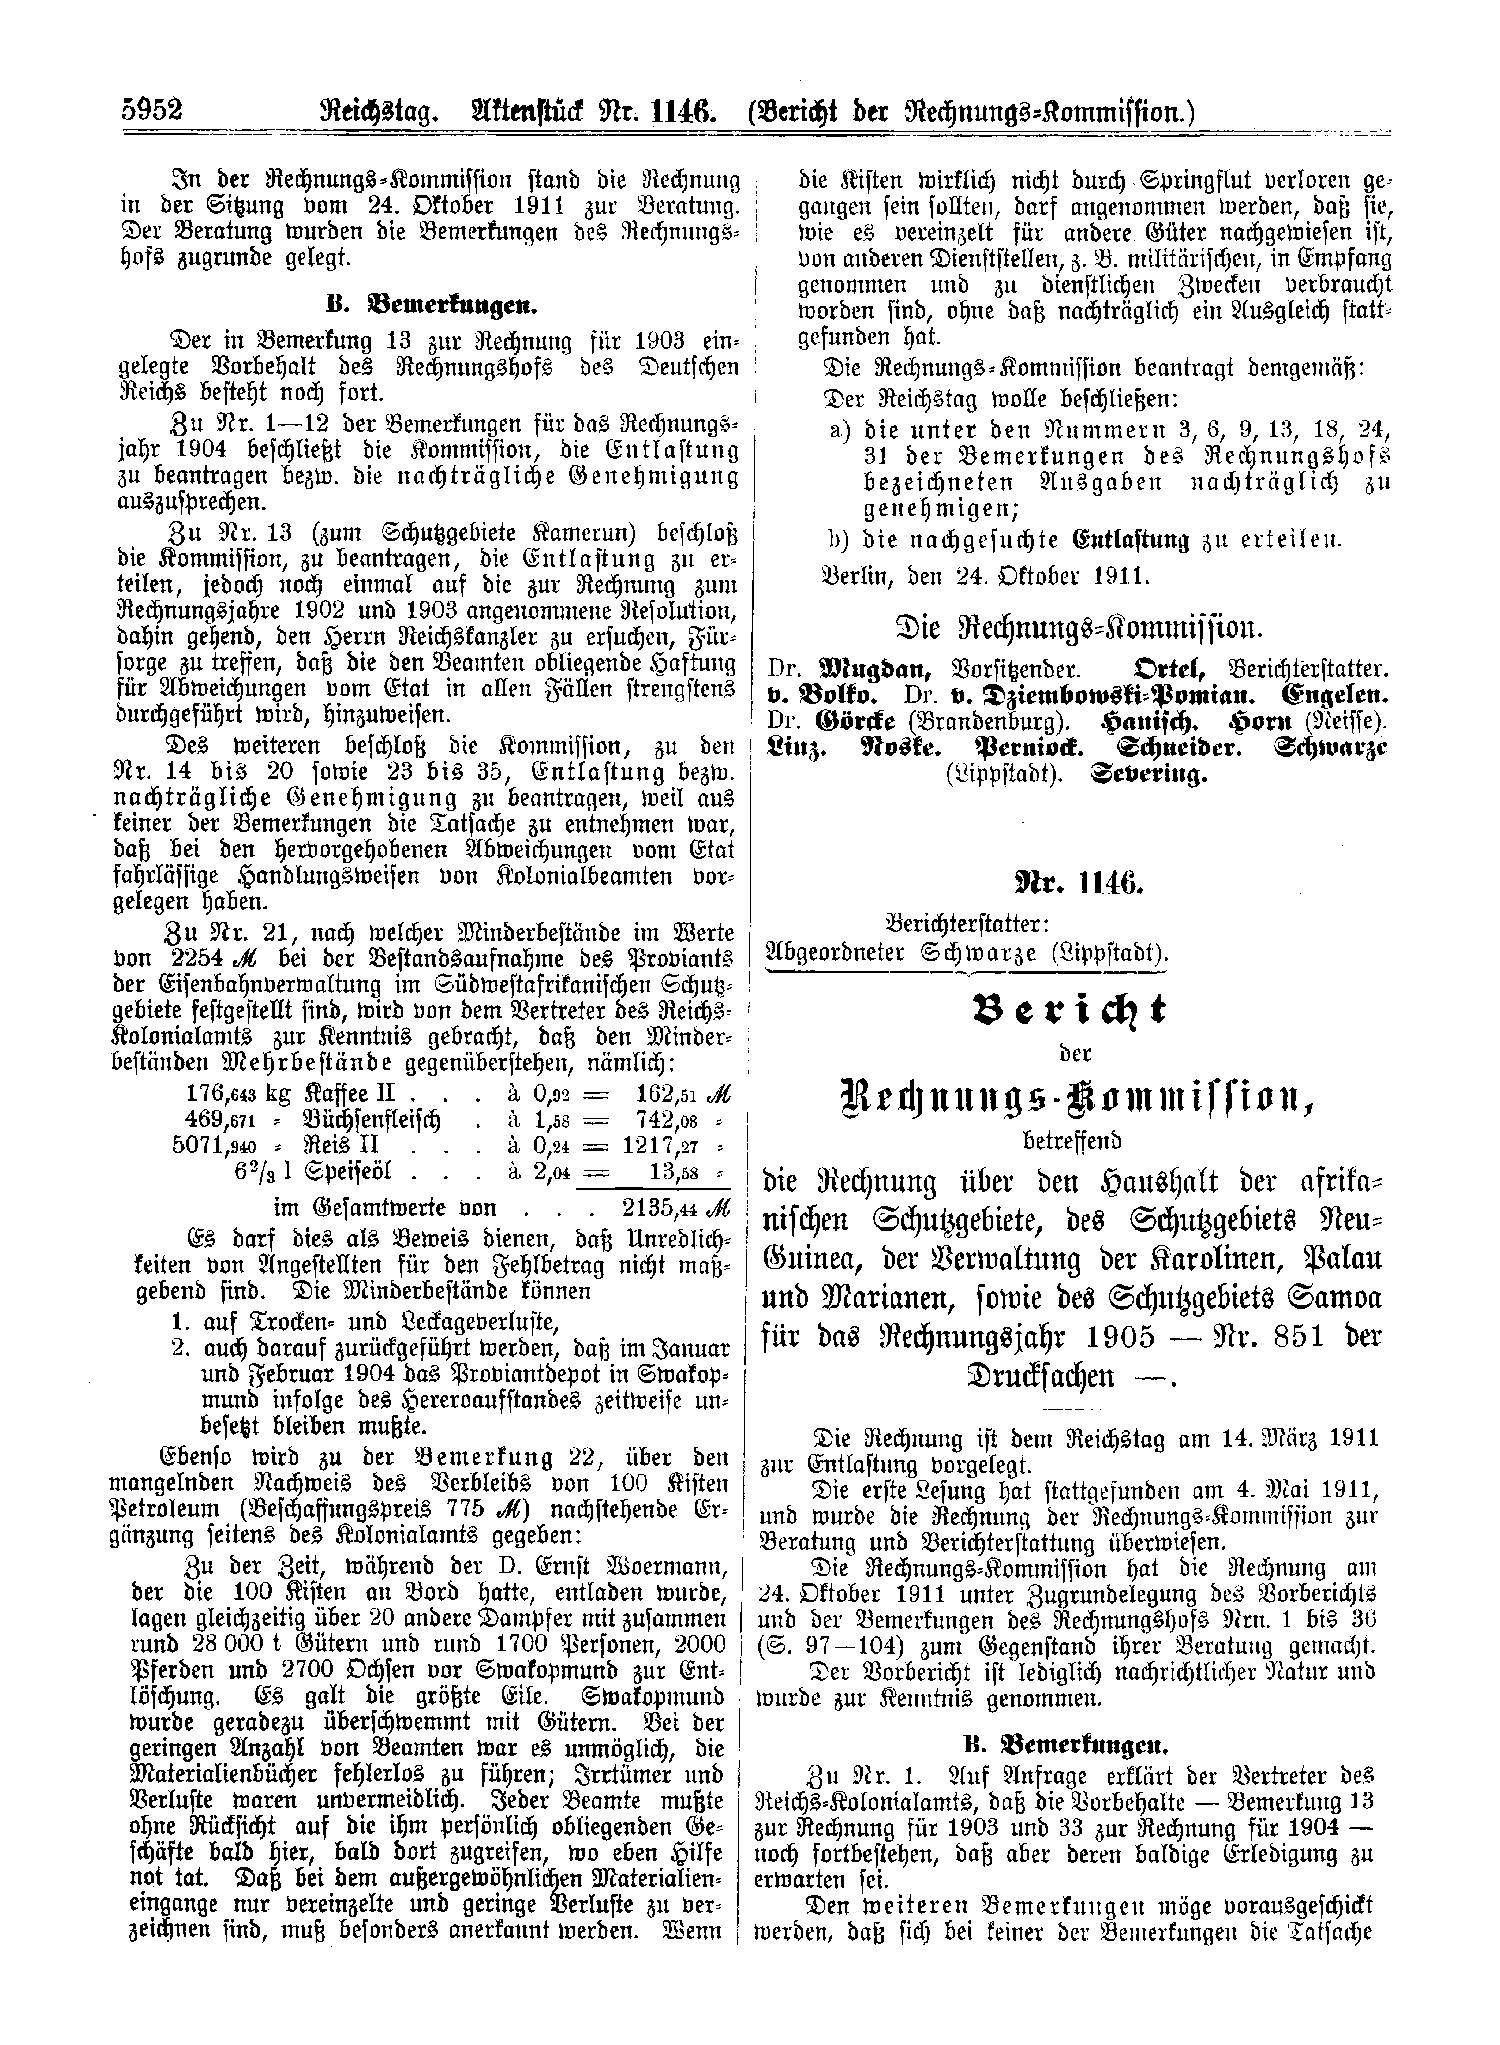 Scan of page 5952